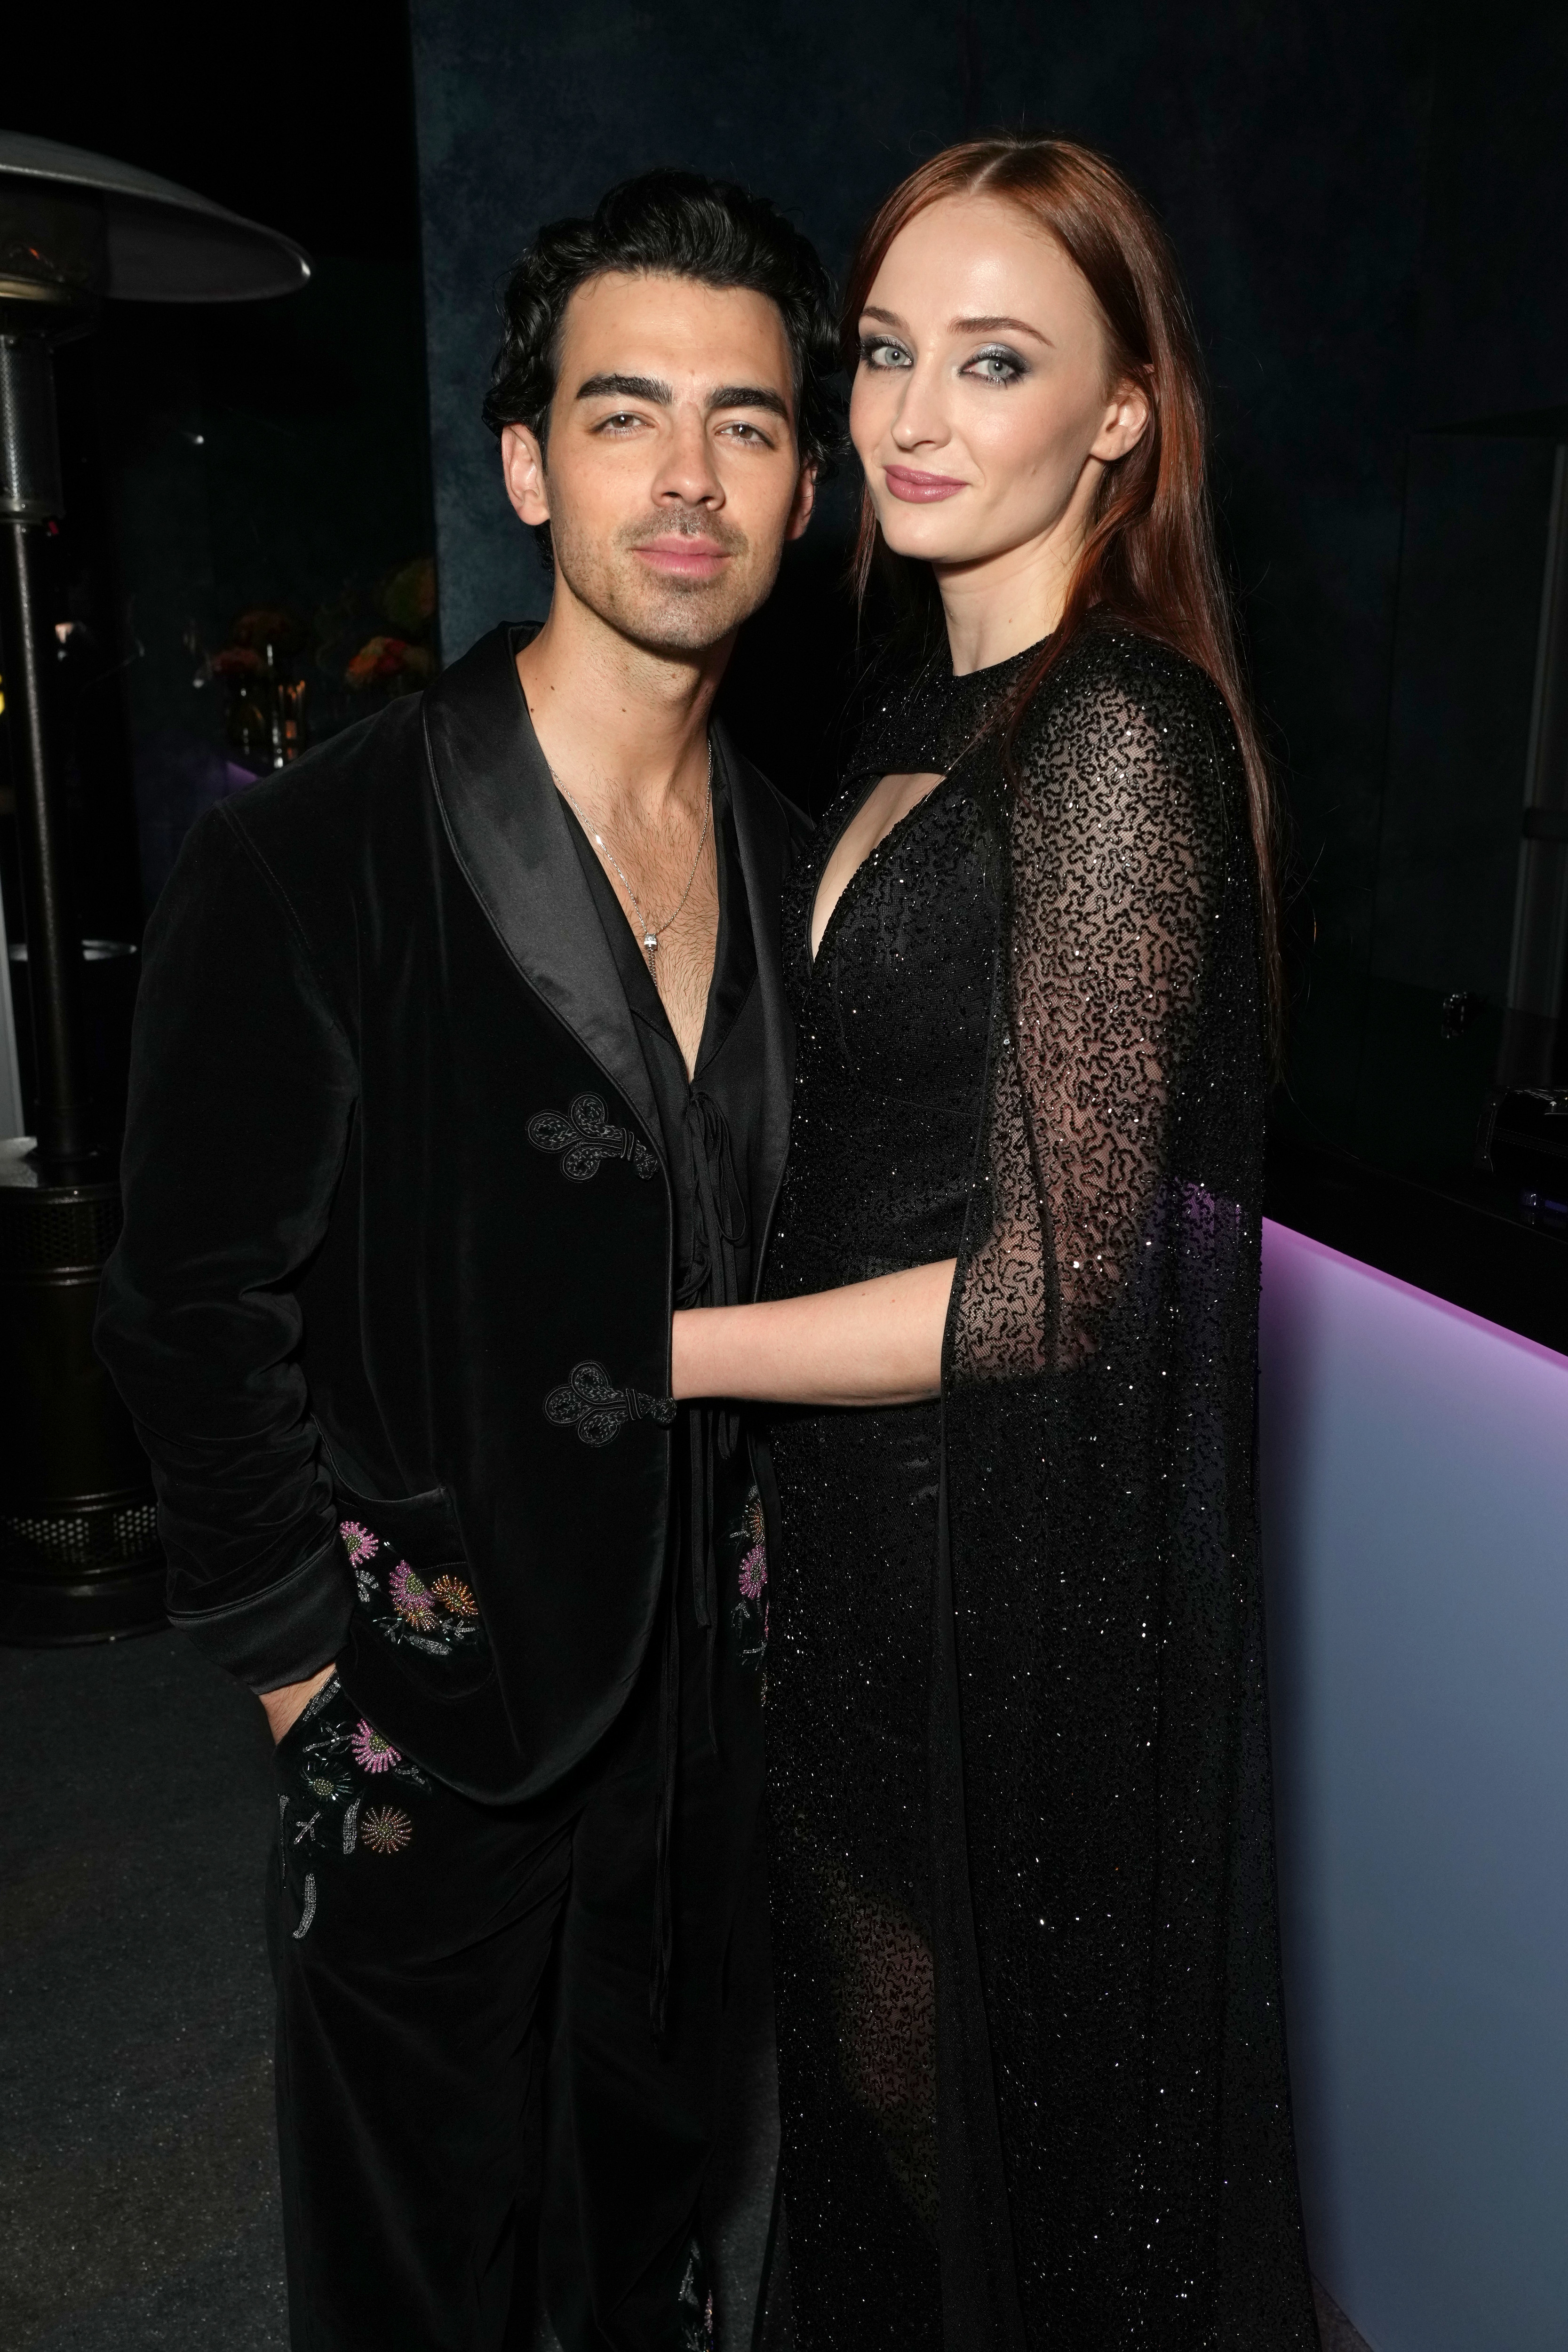 sophie turner with her arms around joe jonas at an event